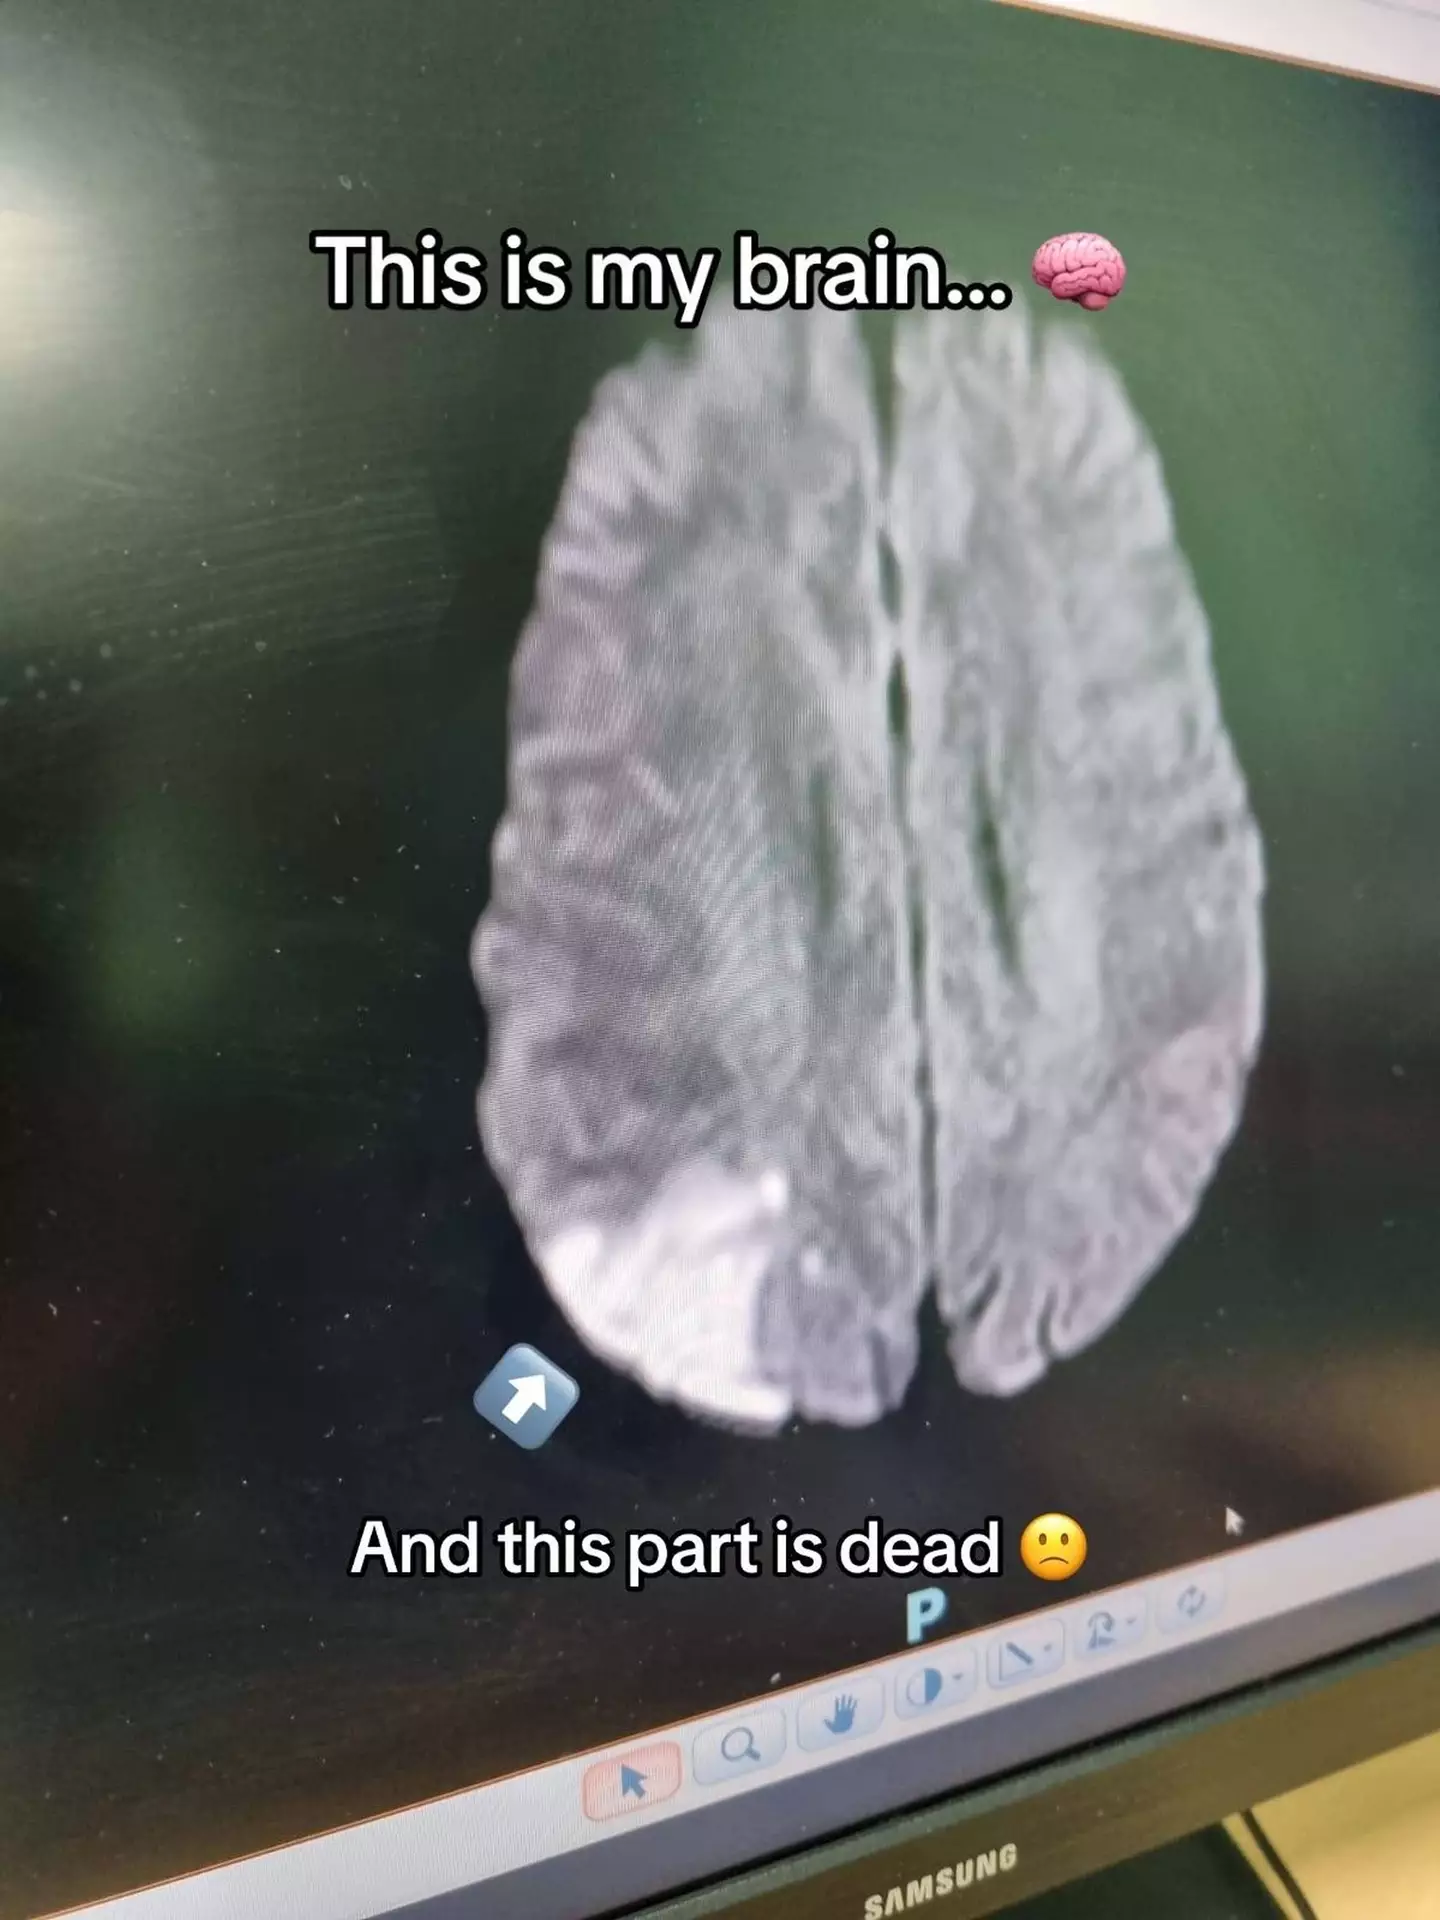 He was told that an eighth of his brain had died after he'd had a stroke.